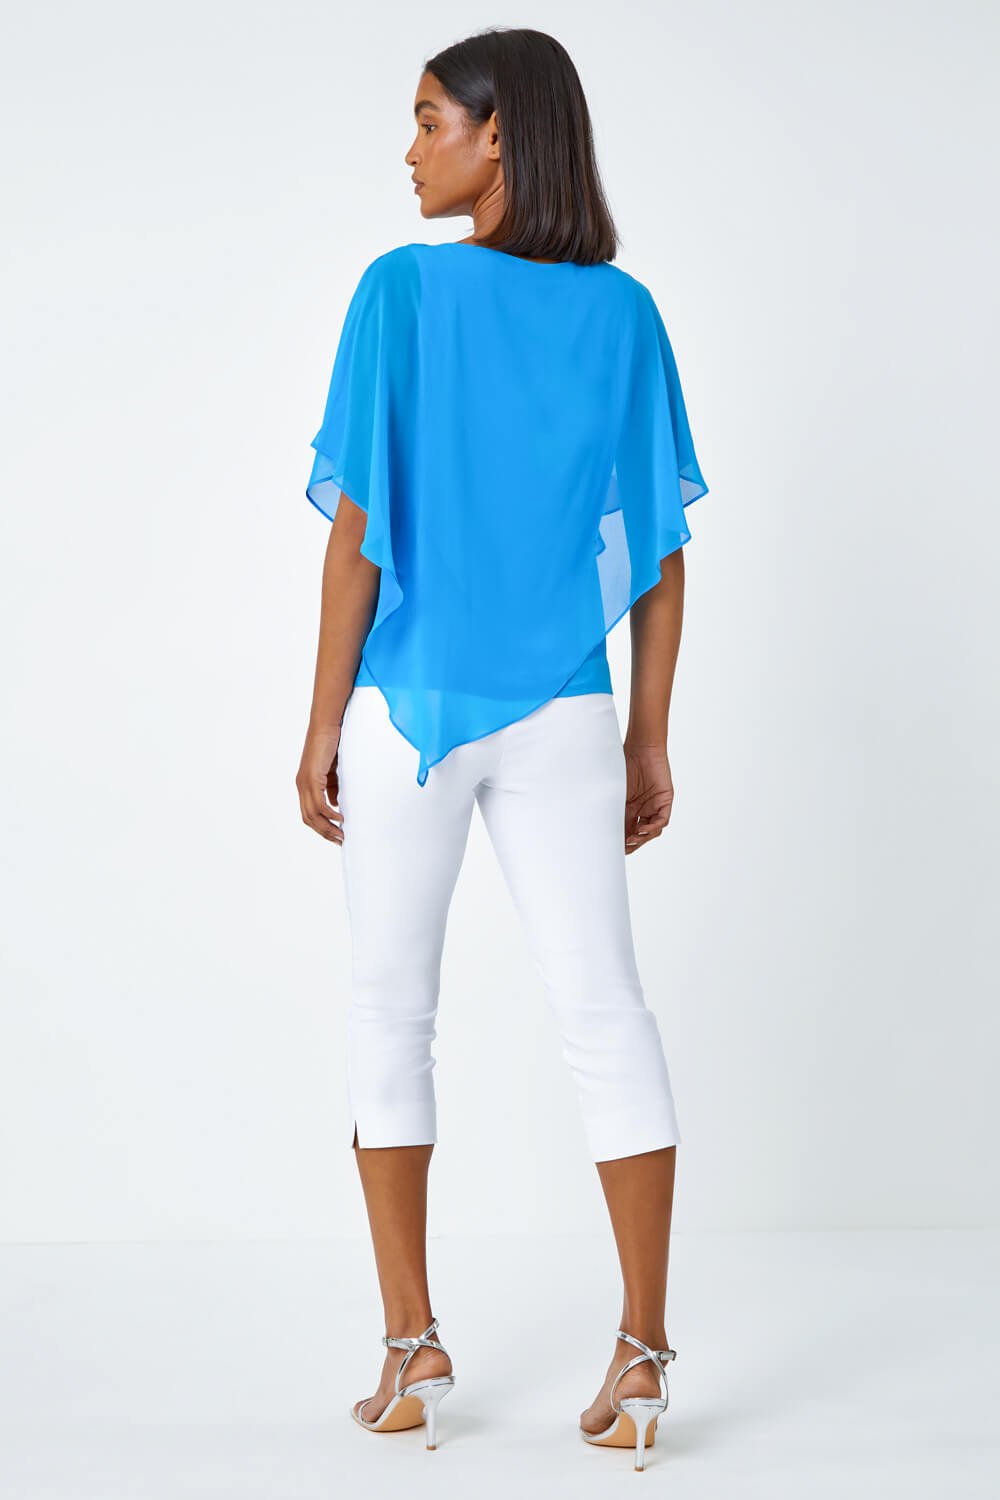 Turquoise Asymmetric Cold Shoulder Stretch Top, Image 3 of 5